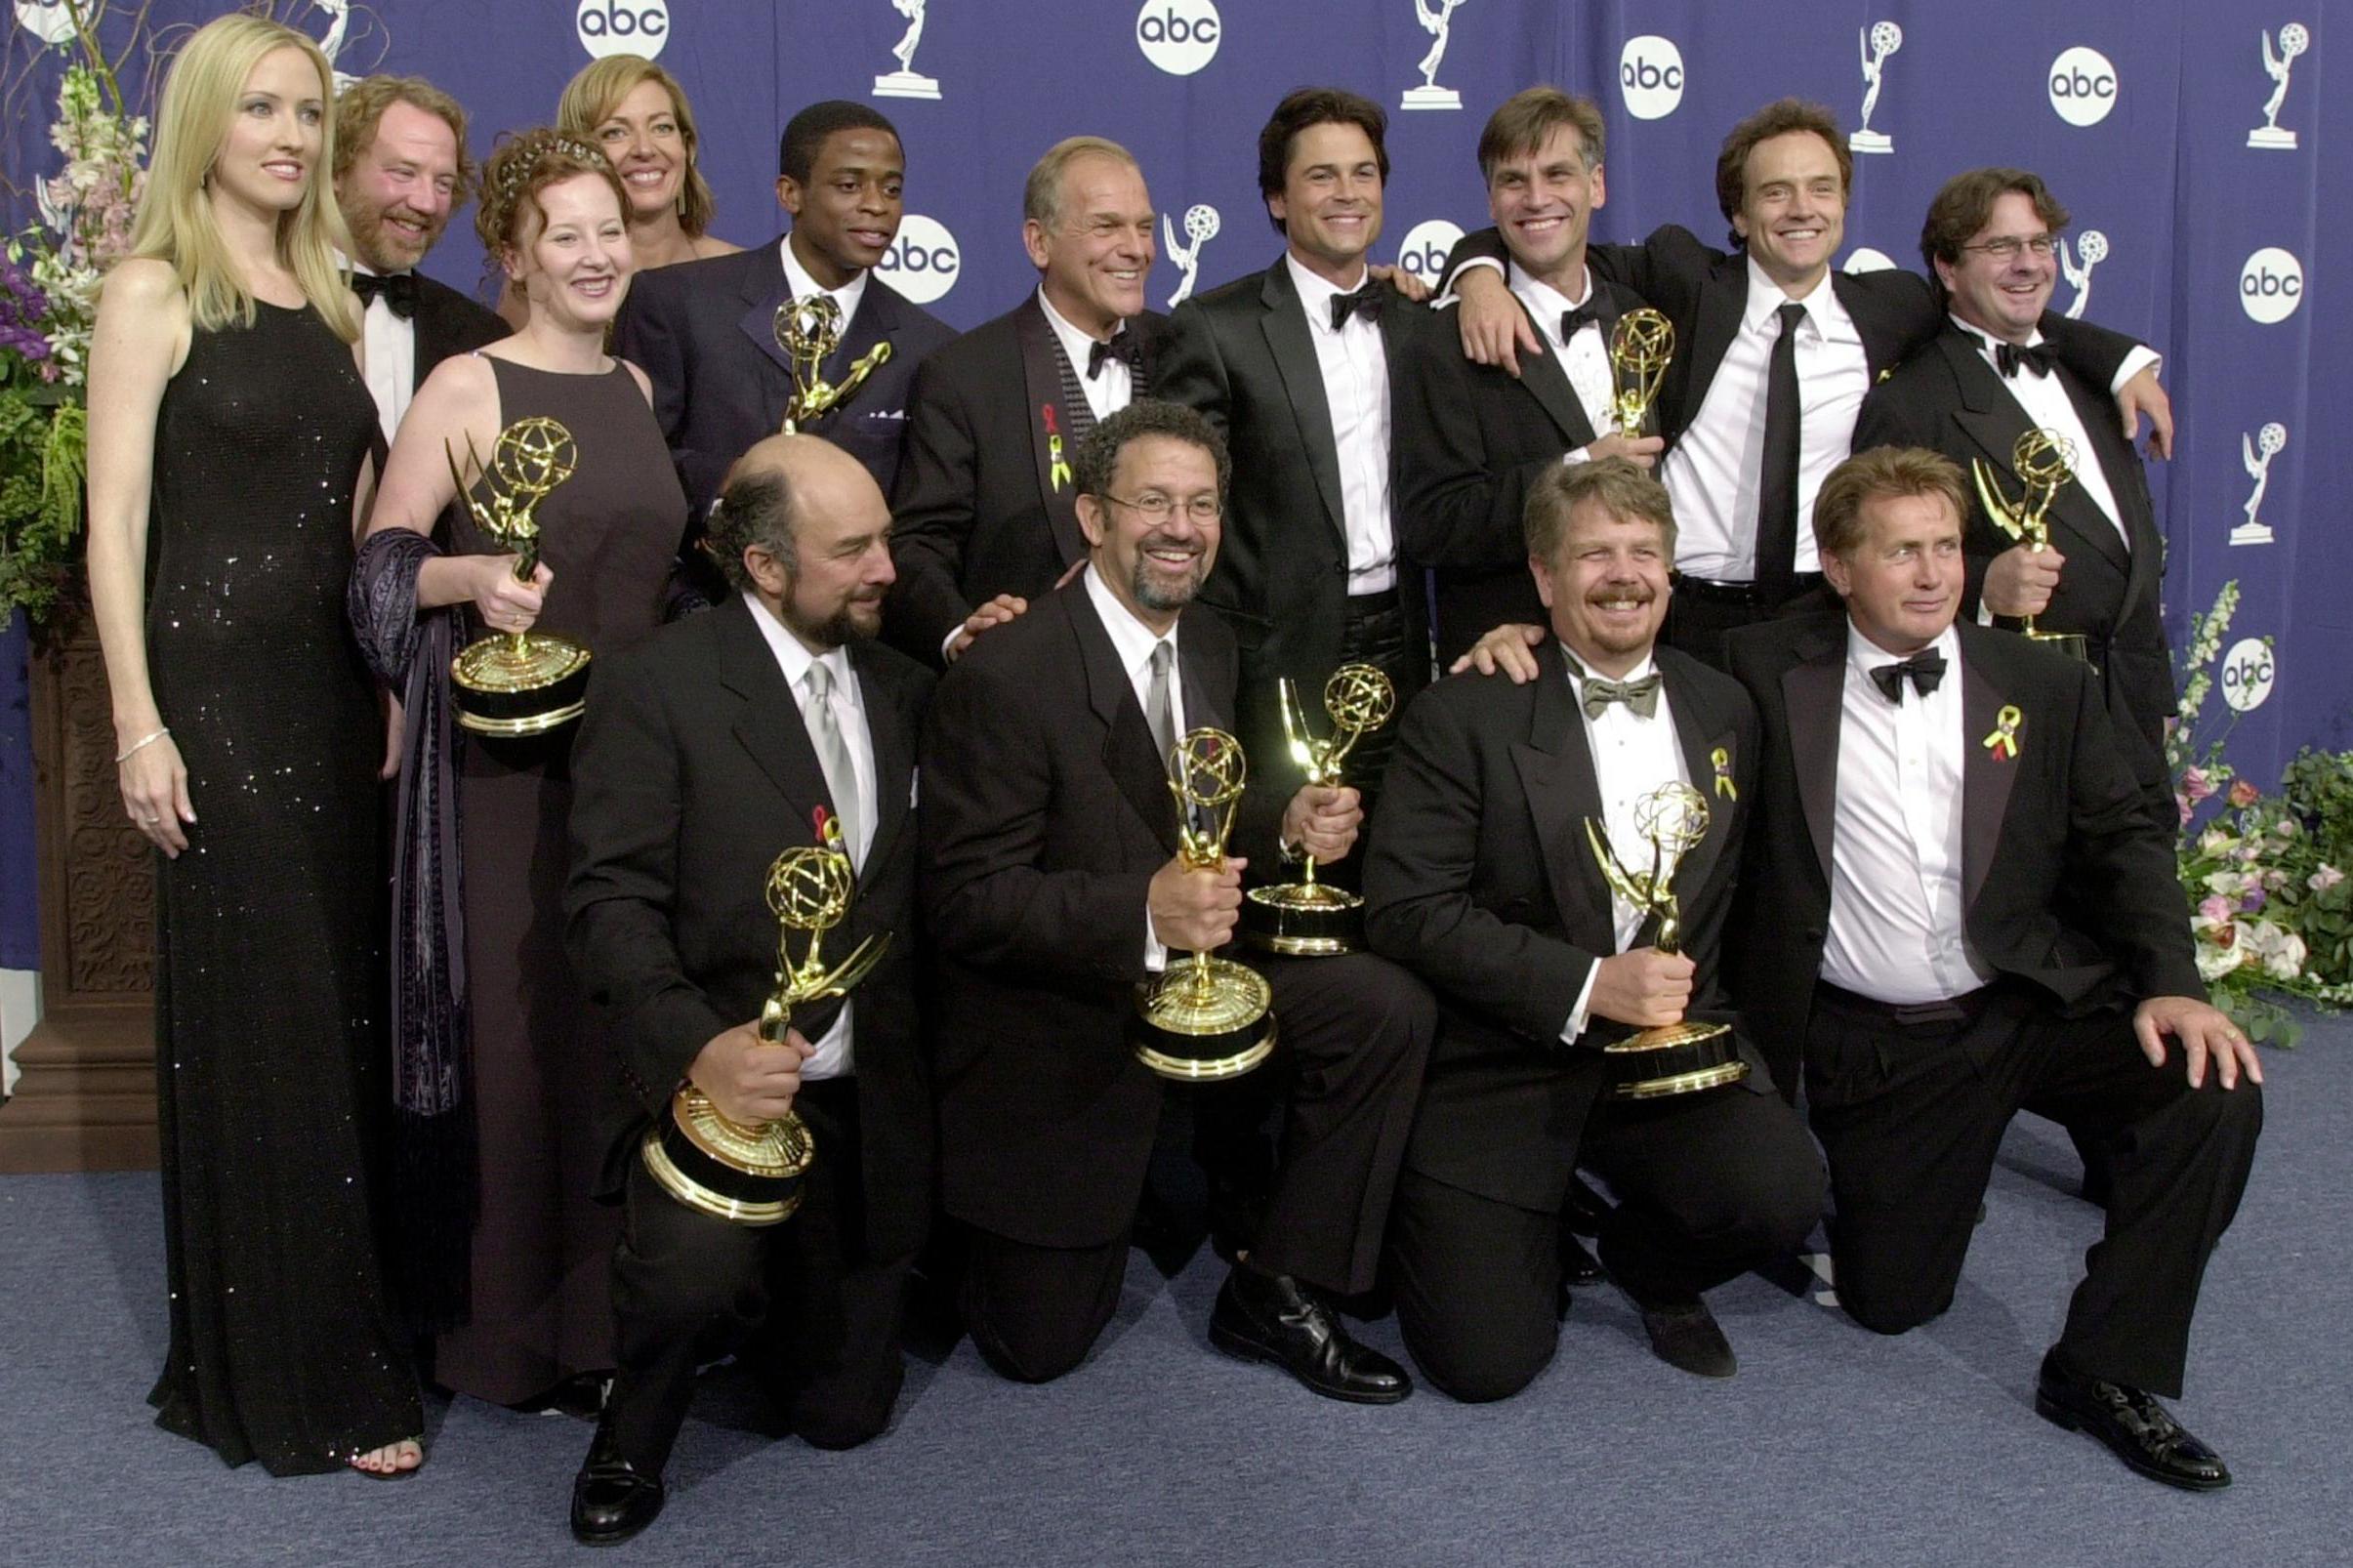 The producers, writers and cast of The West Wing pose with their awards for Outstanding Drama Series backstage at the 52nd Annual Primetime Emmy Awards on 10 September, 2000 in Los Angeles, CA. The cast won a record nine Emmys.